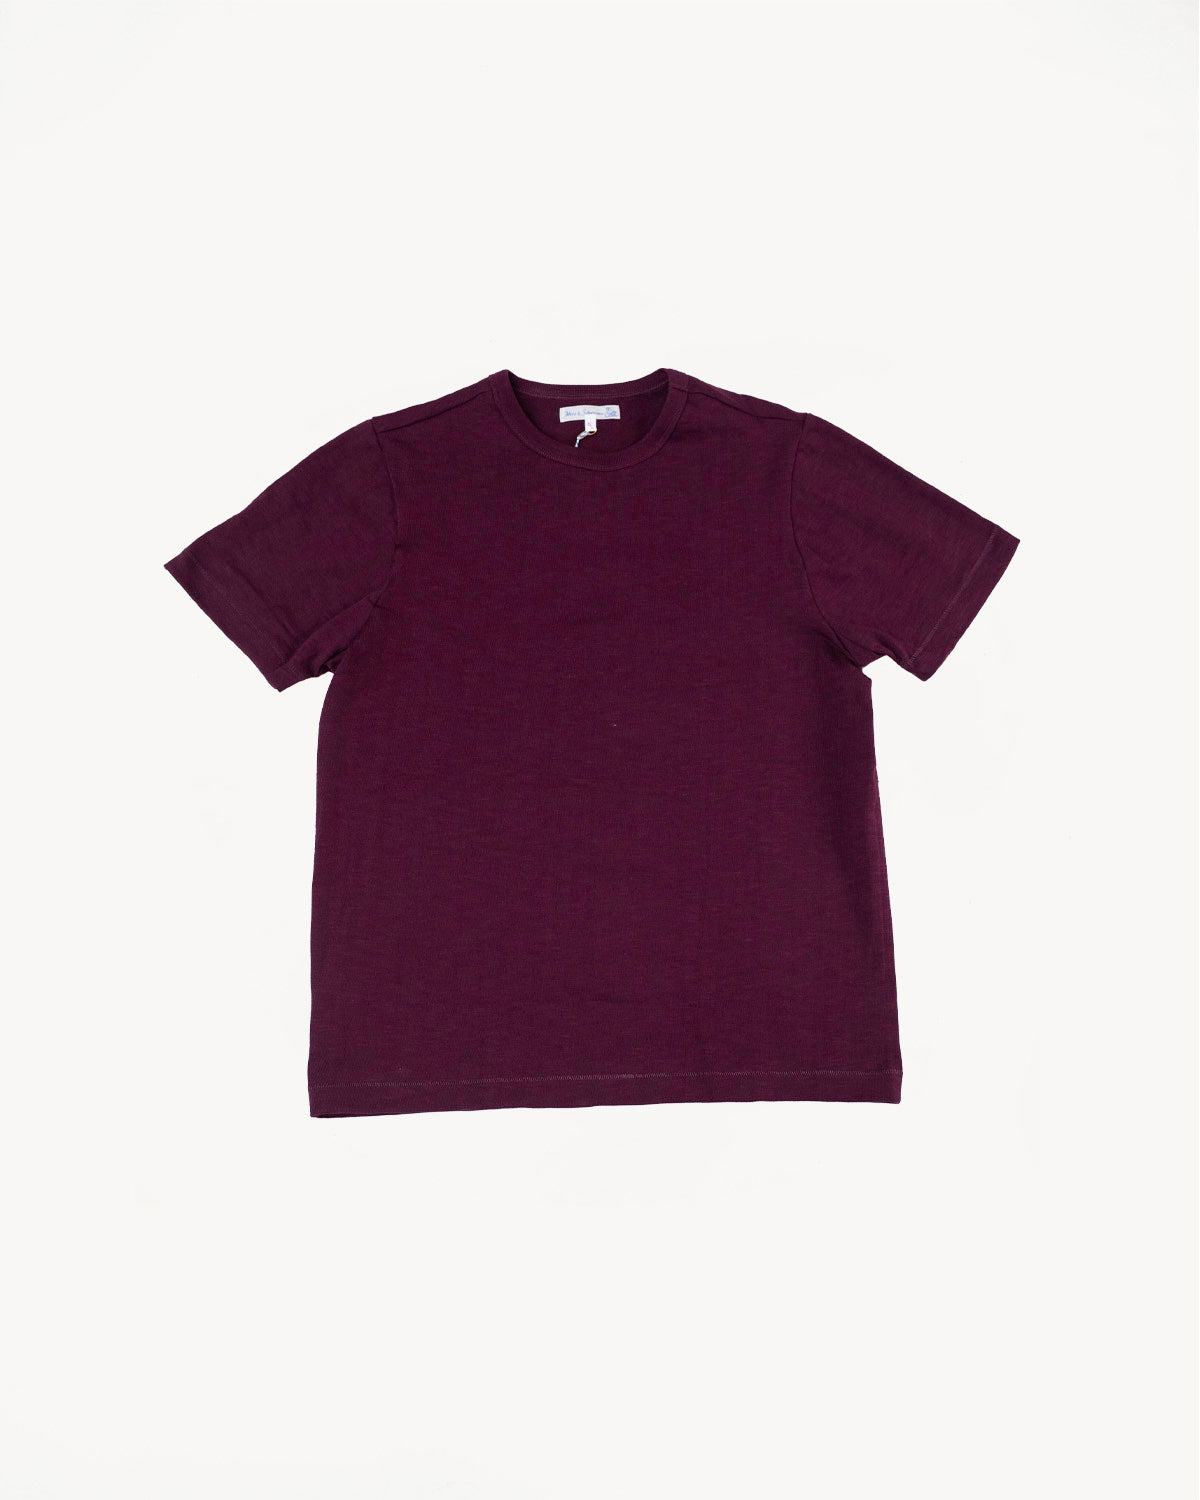 2S14.507 - 13.4oz Loopwheeled Heavy T-Shirt Relaxed Fit - Ruby Red | James  Dant